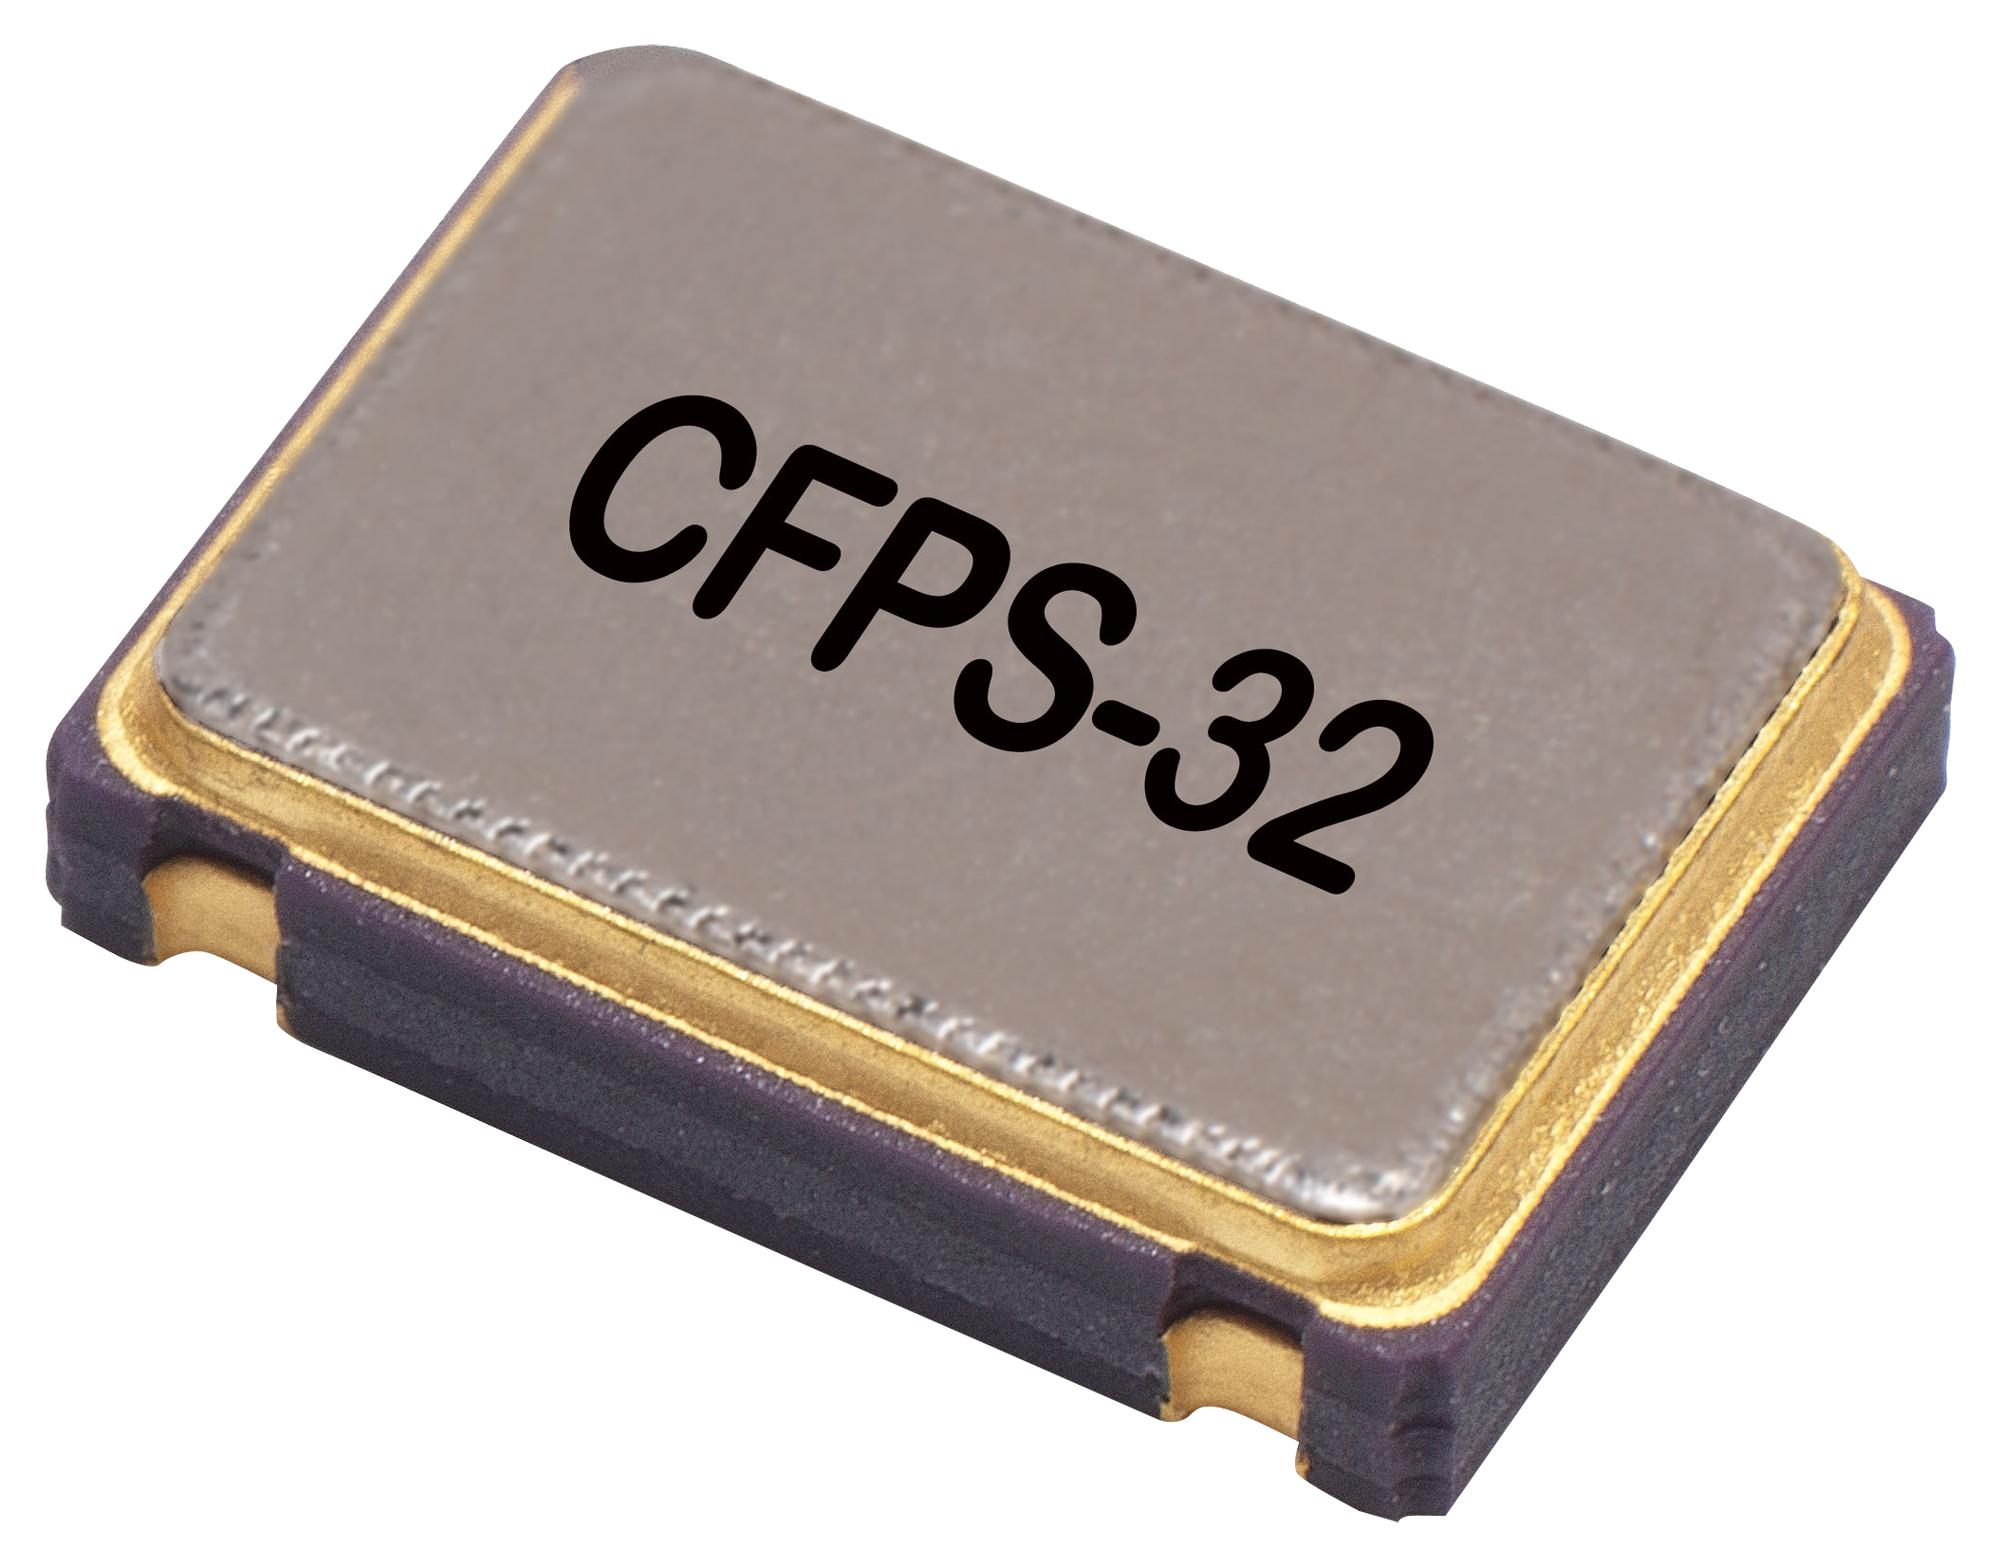 LFSPXO025912 CRYSTAL OSCILLATOR, SMD, 10MHZ IQD FREQUENCY PRODUCTS